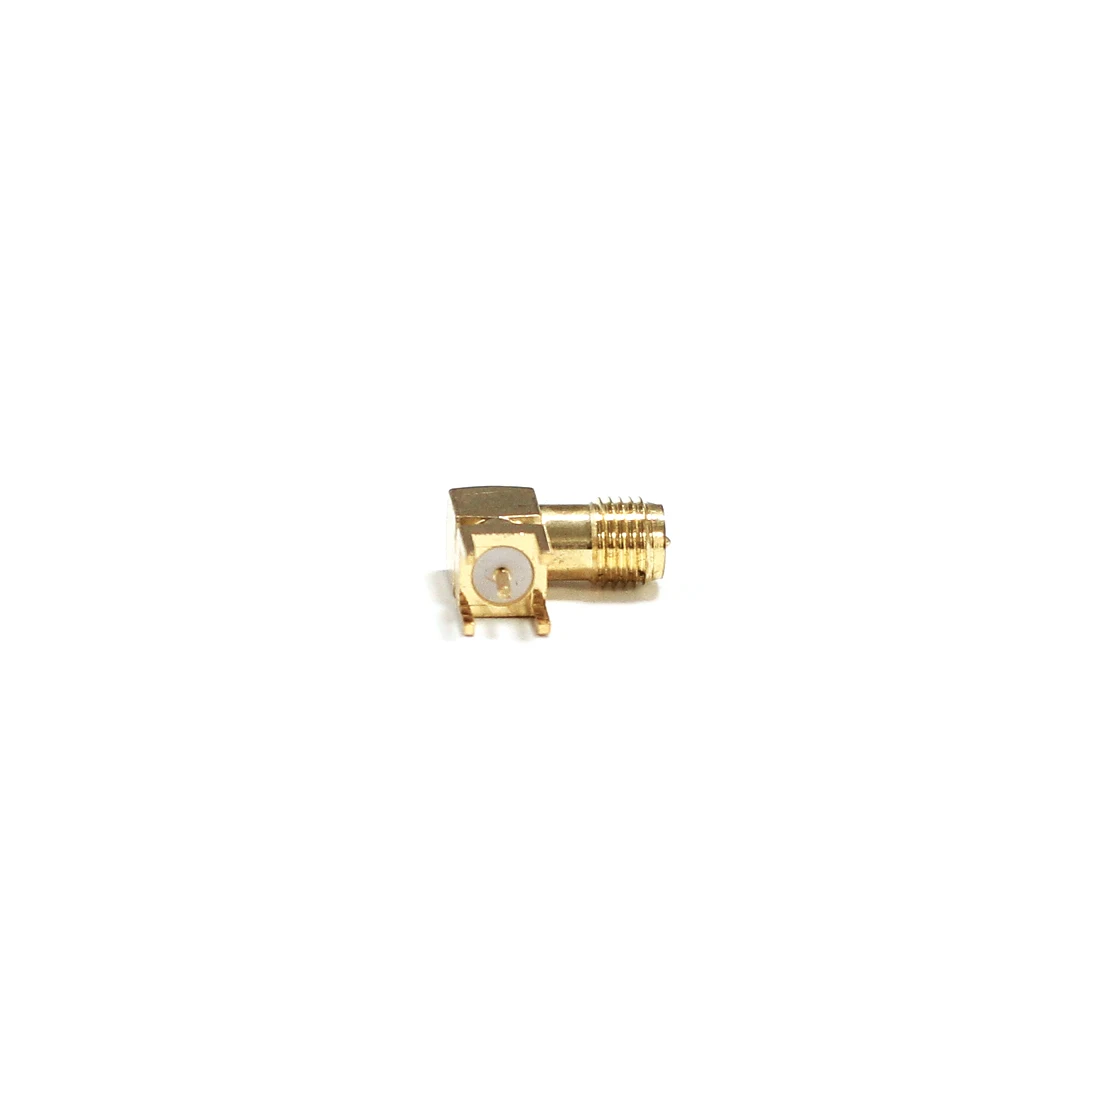 1pc RP-SMA  Female Jack  RF Coax Modem Convertor Connector  PCB Mount Right Angle  Goldplated  NEW  Wholesale